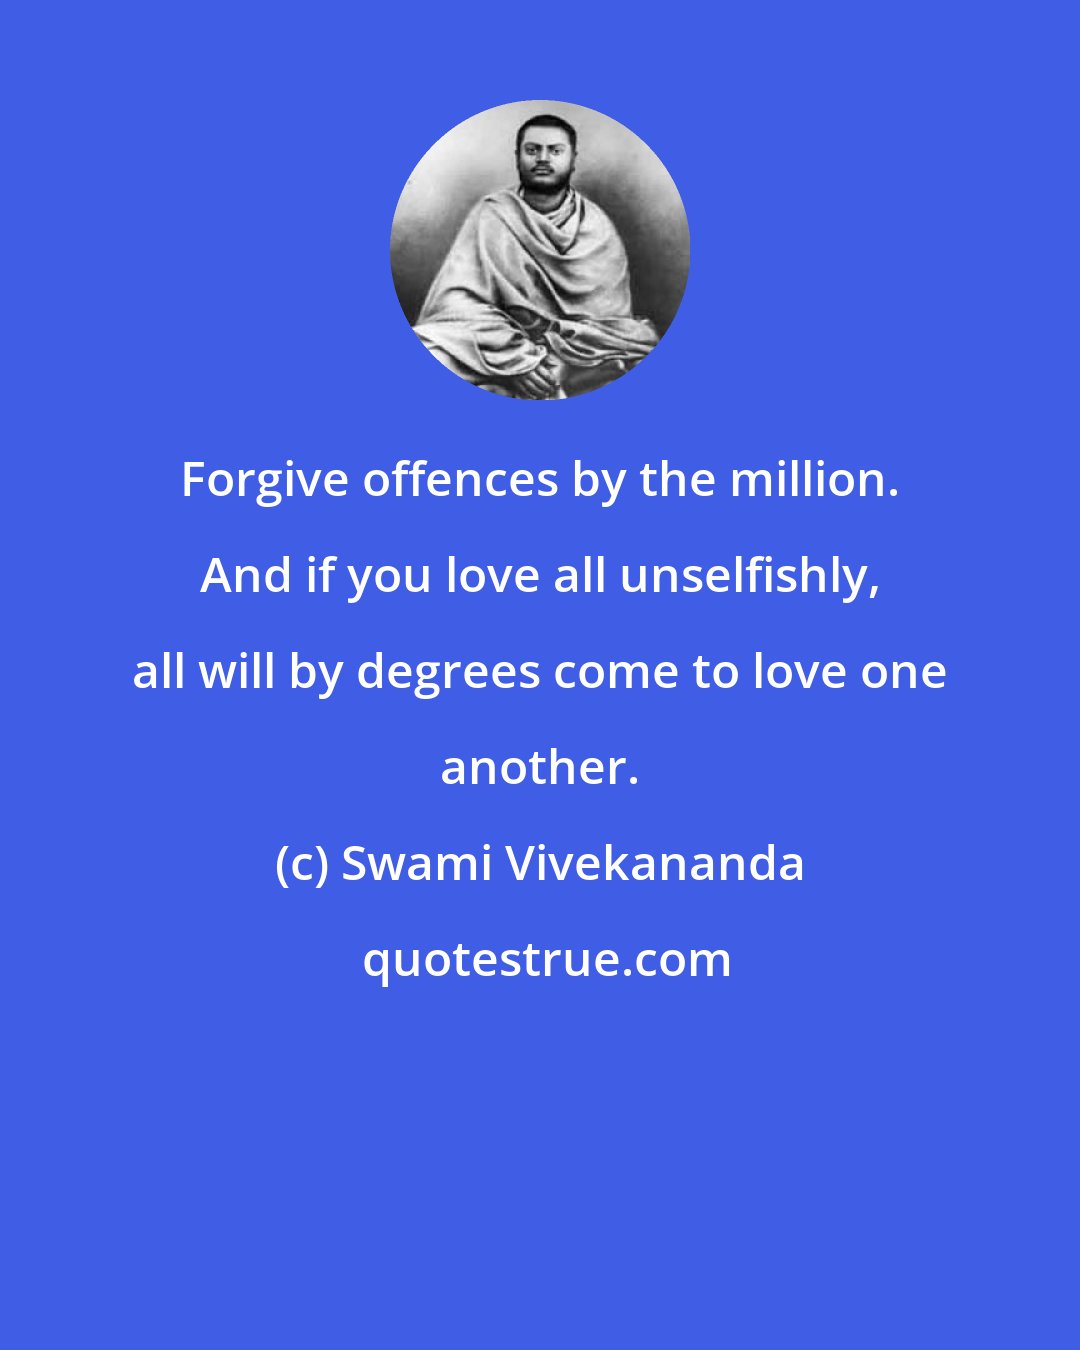 Swami Vivekananda: Forgive offences by the million. And if you love all unselfishly, all will by degrees come to love one another.